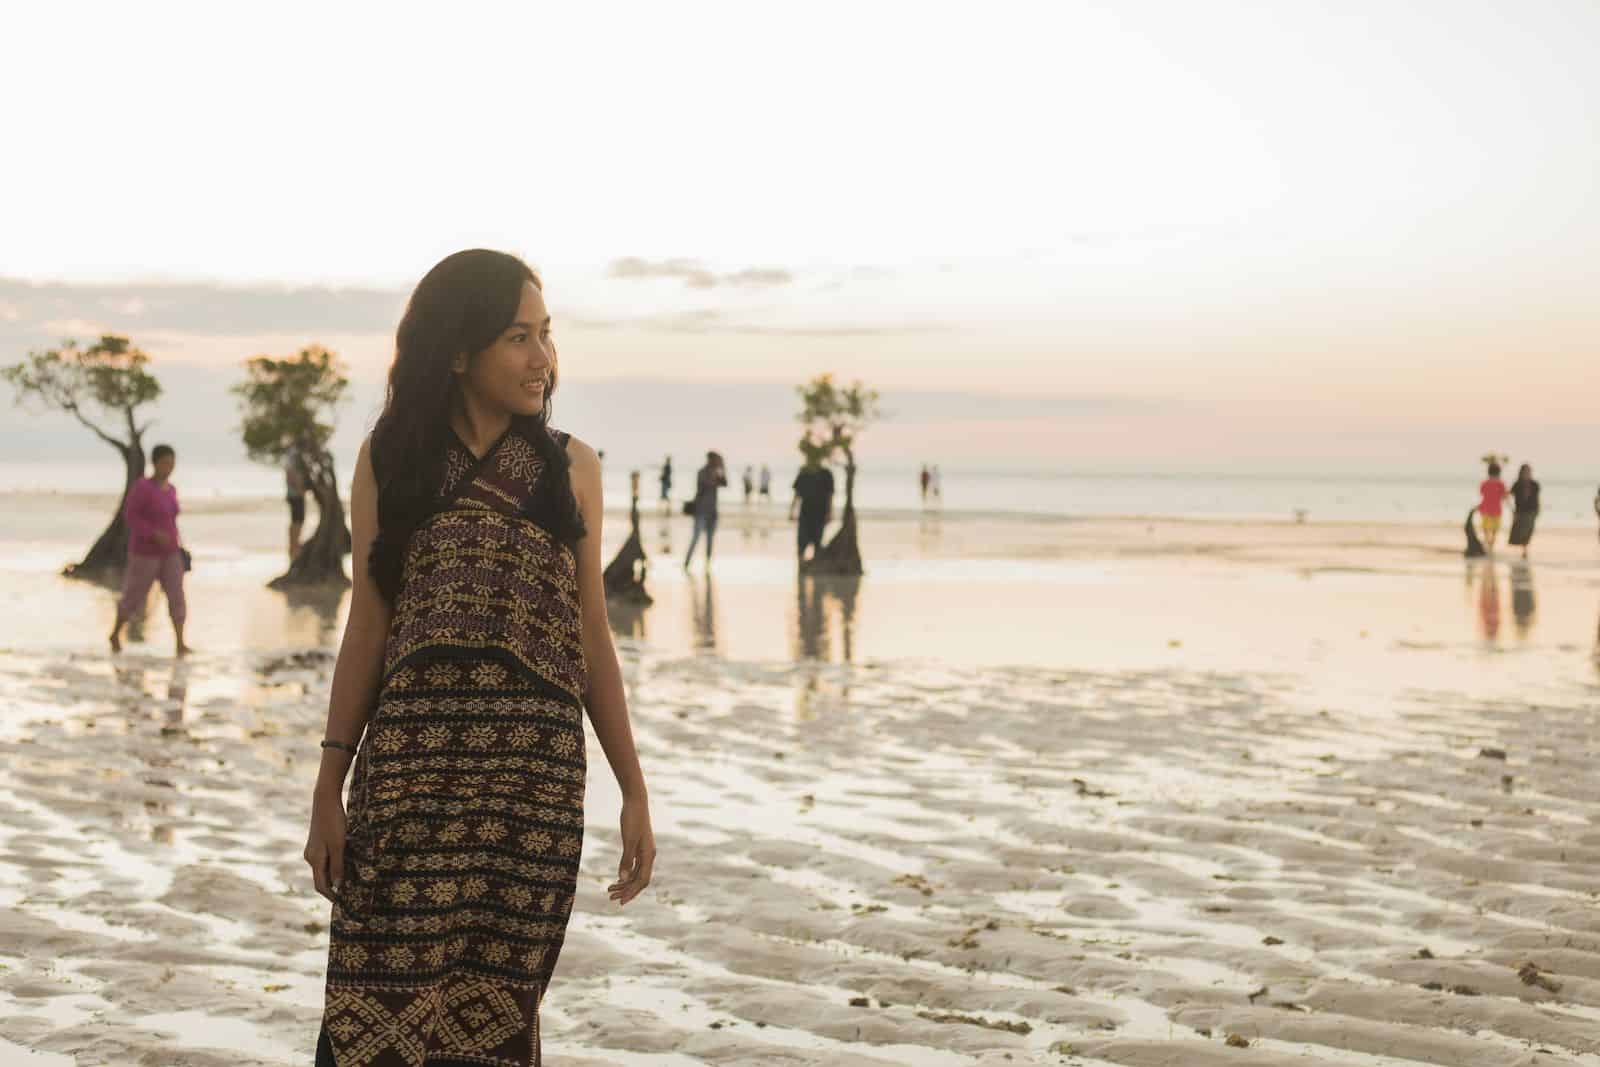 A girl on the beach wearing traditional Indonesian clothes.